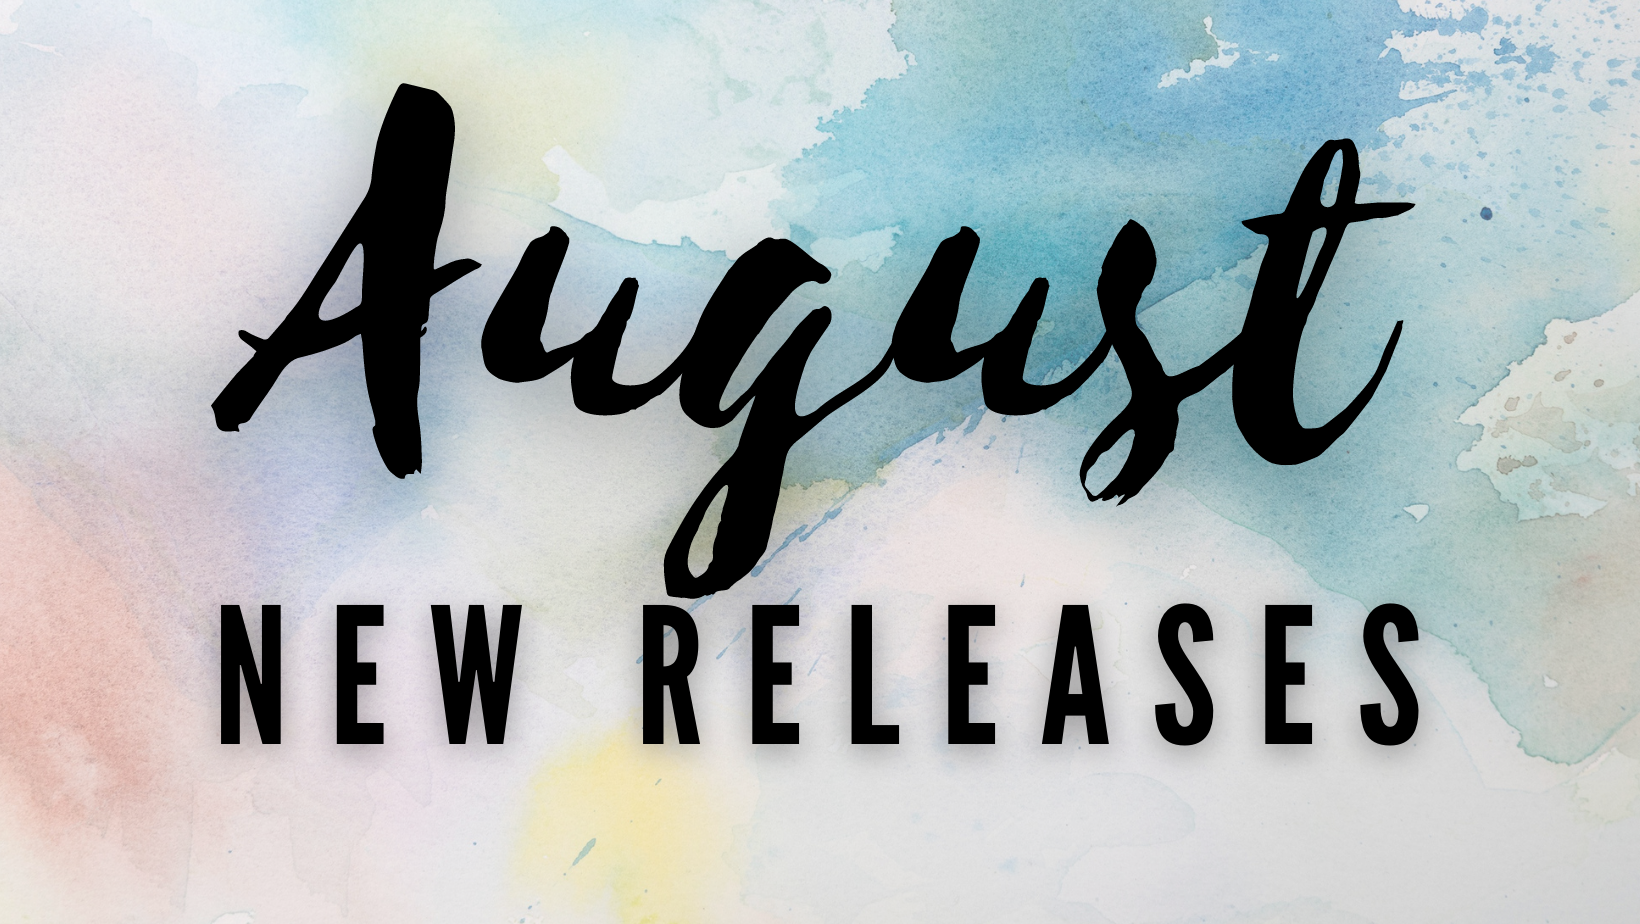 August New Releases Graphic with Watercolor background